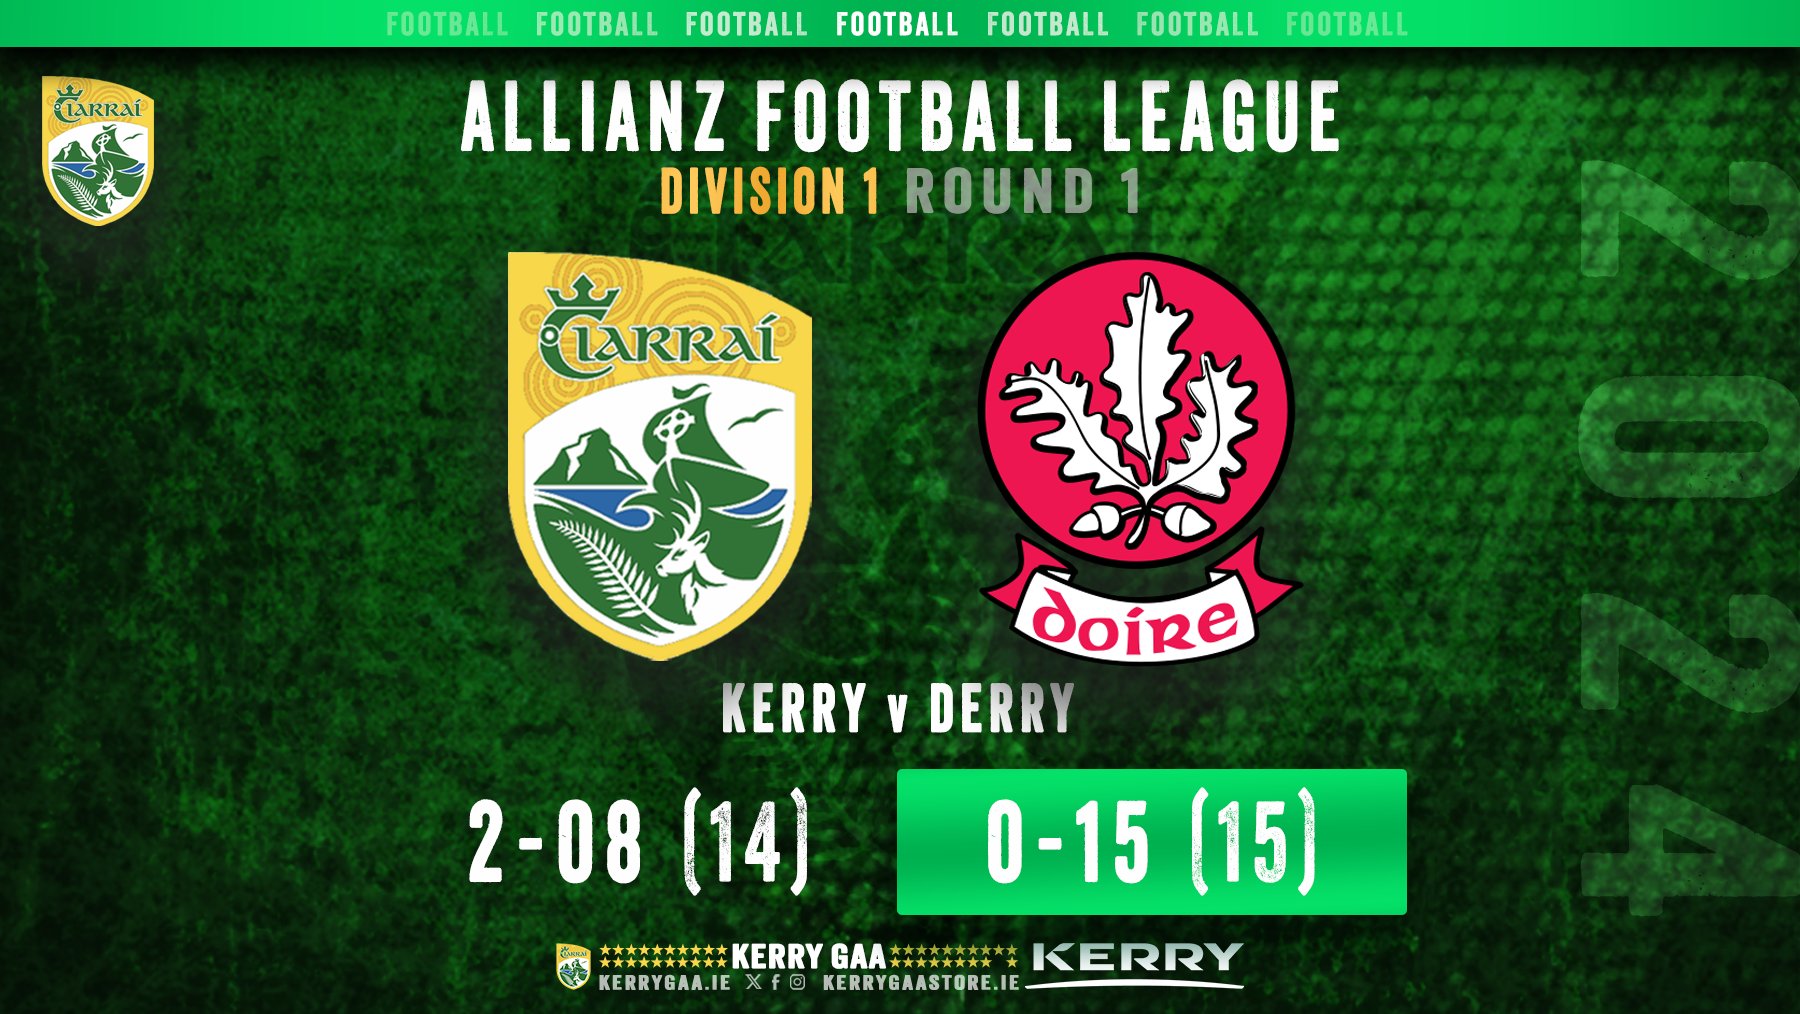 Defeat for Kerry in the opening round of the League